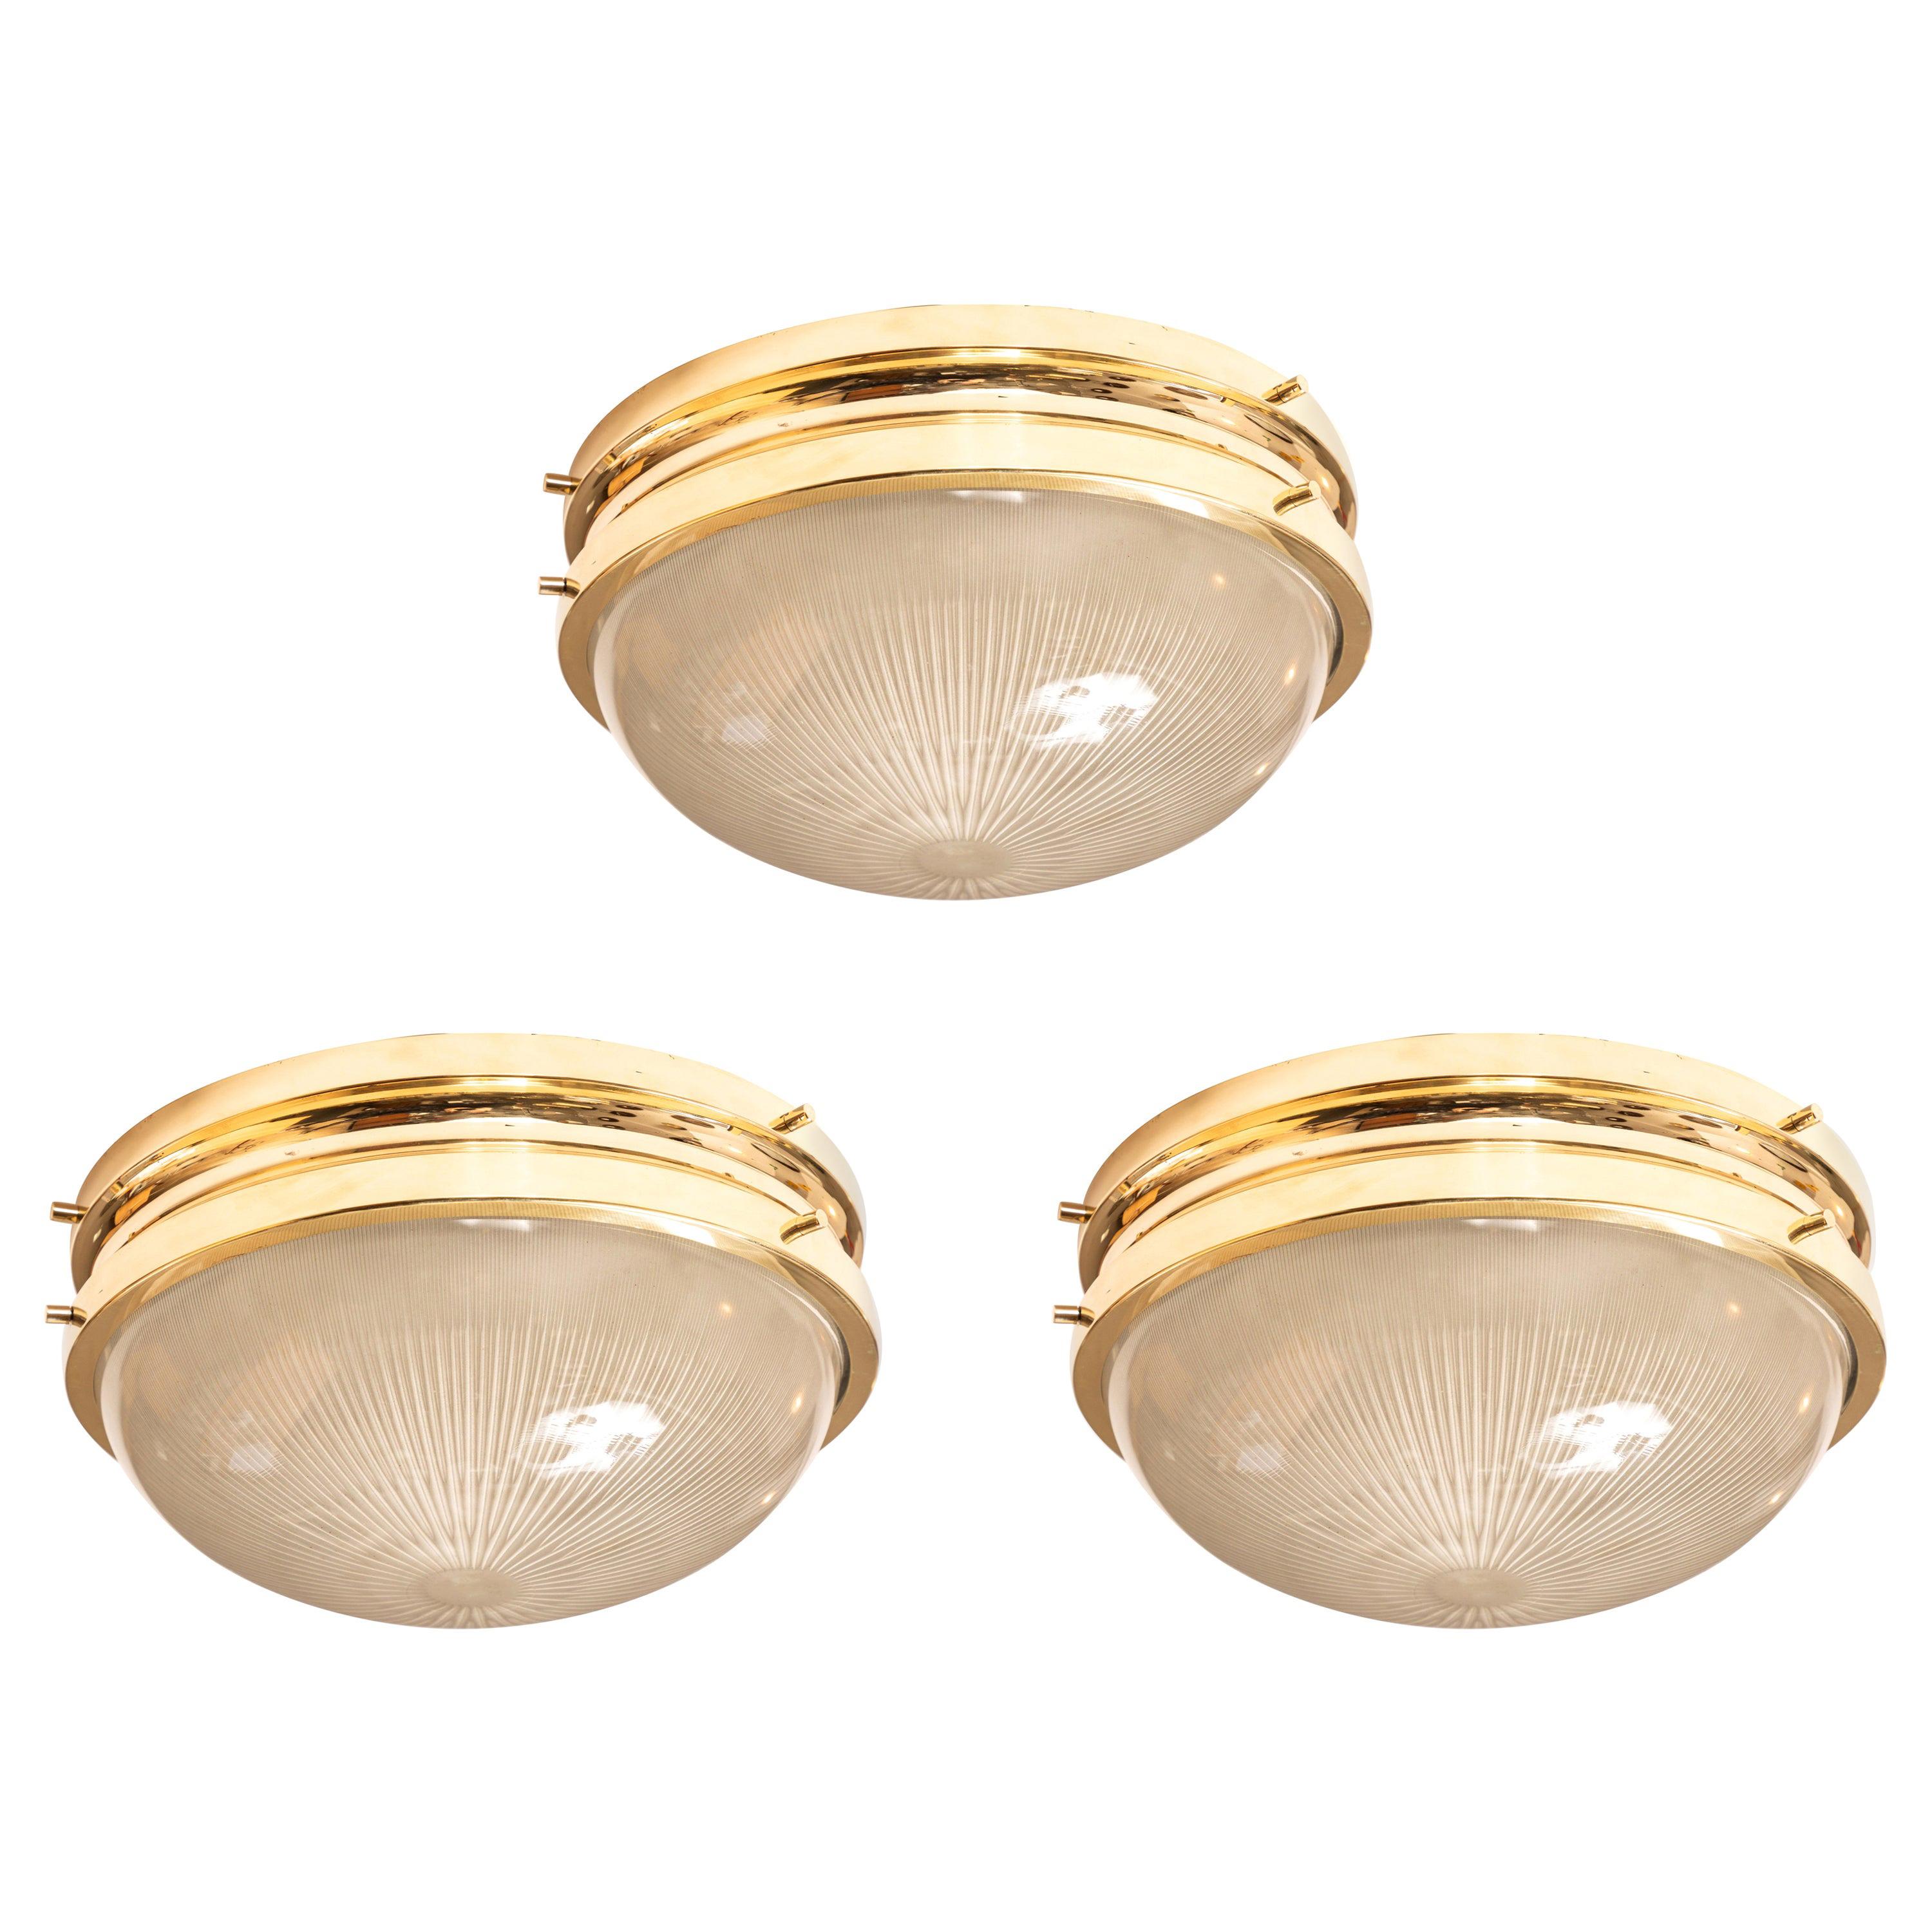 1960s Sergio Mazza brass 'Sigma' wall or ceiling lights for Artemide. Executed in polished brass and pressed opaline glass by Sergio Mazza for Artemide, Italy, circa 1960s. Professionally rewired for US electrical and accommodates two standard